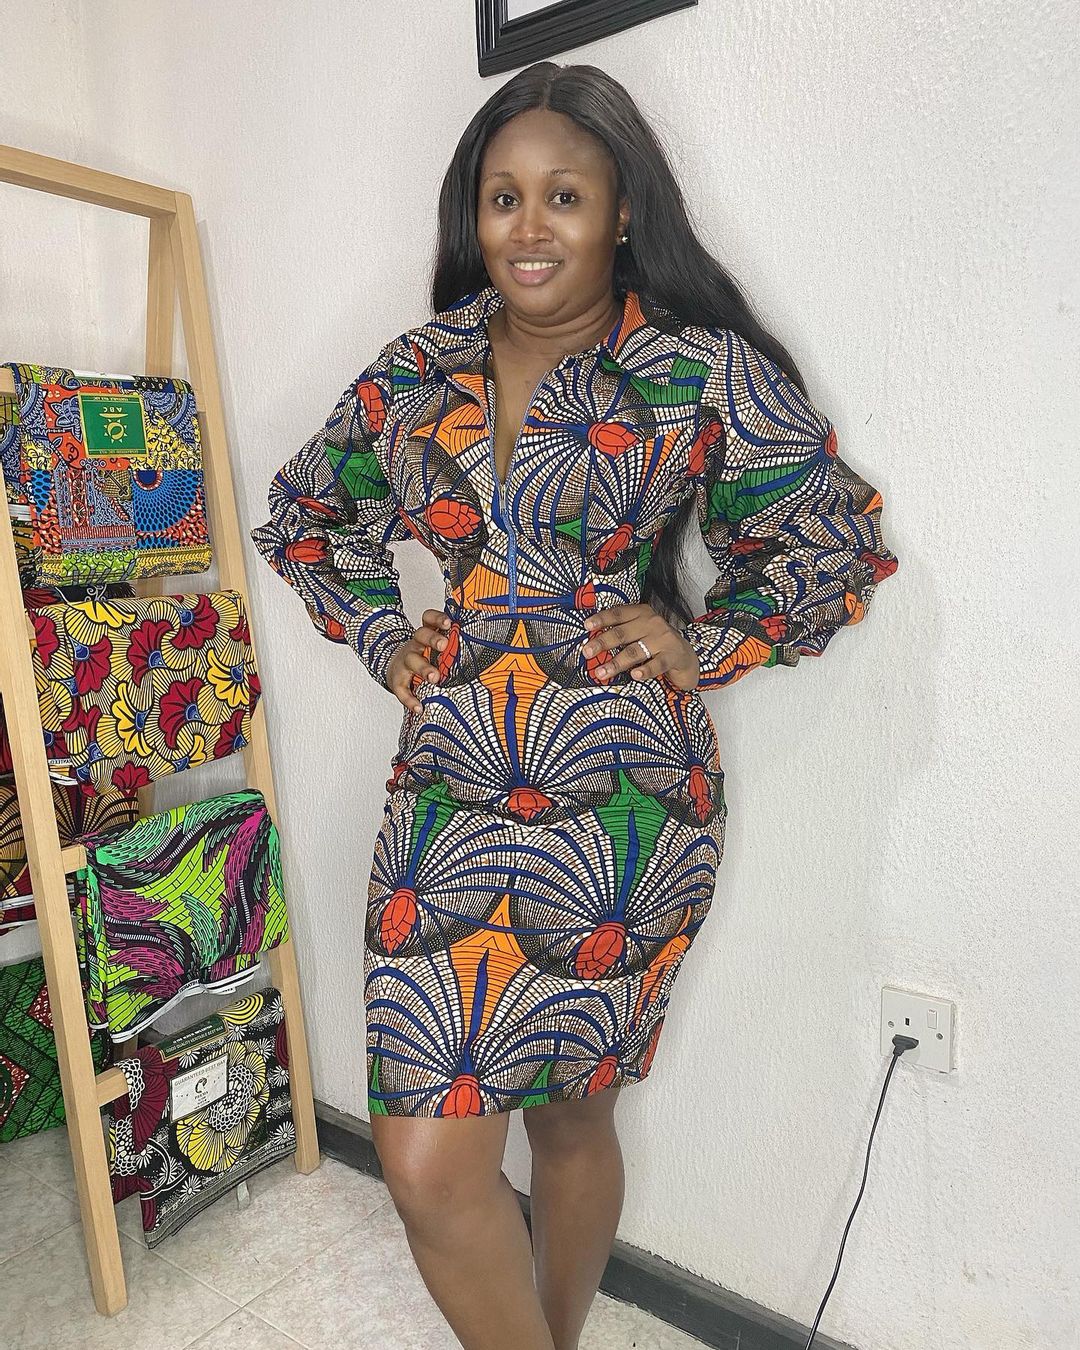 Ankara Long Gown Style | Ankara long gown styles, Simple gowns, African  print fashion dresses